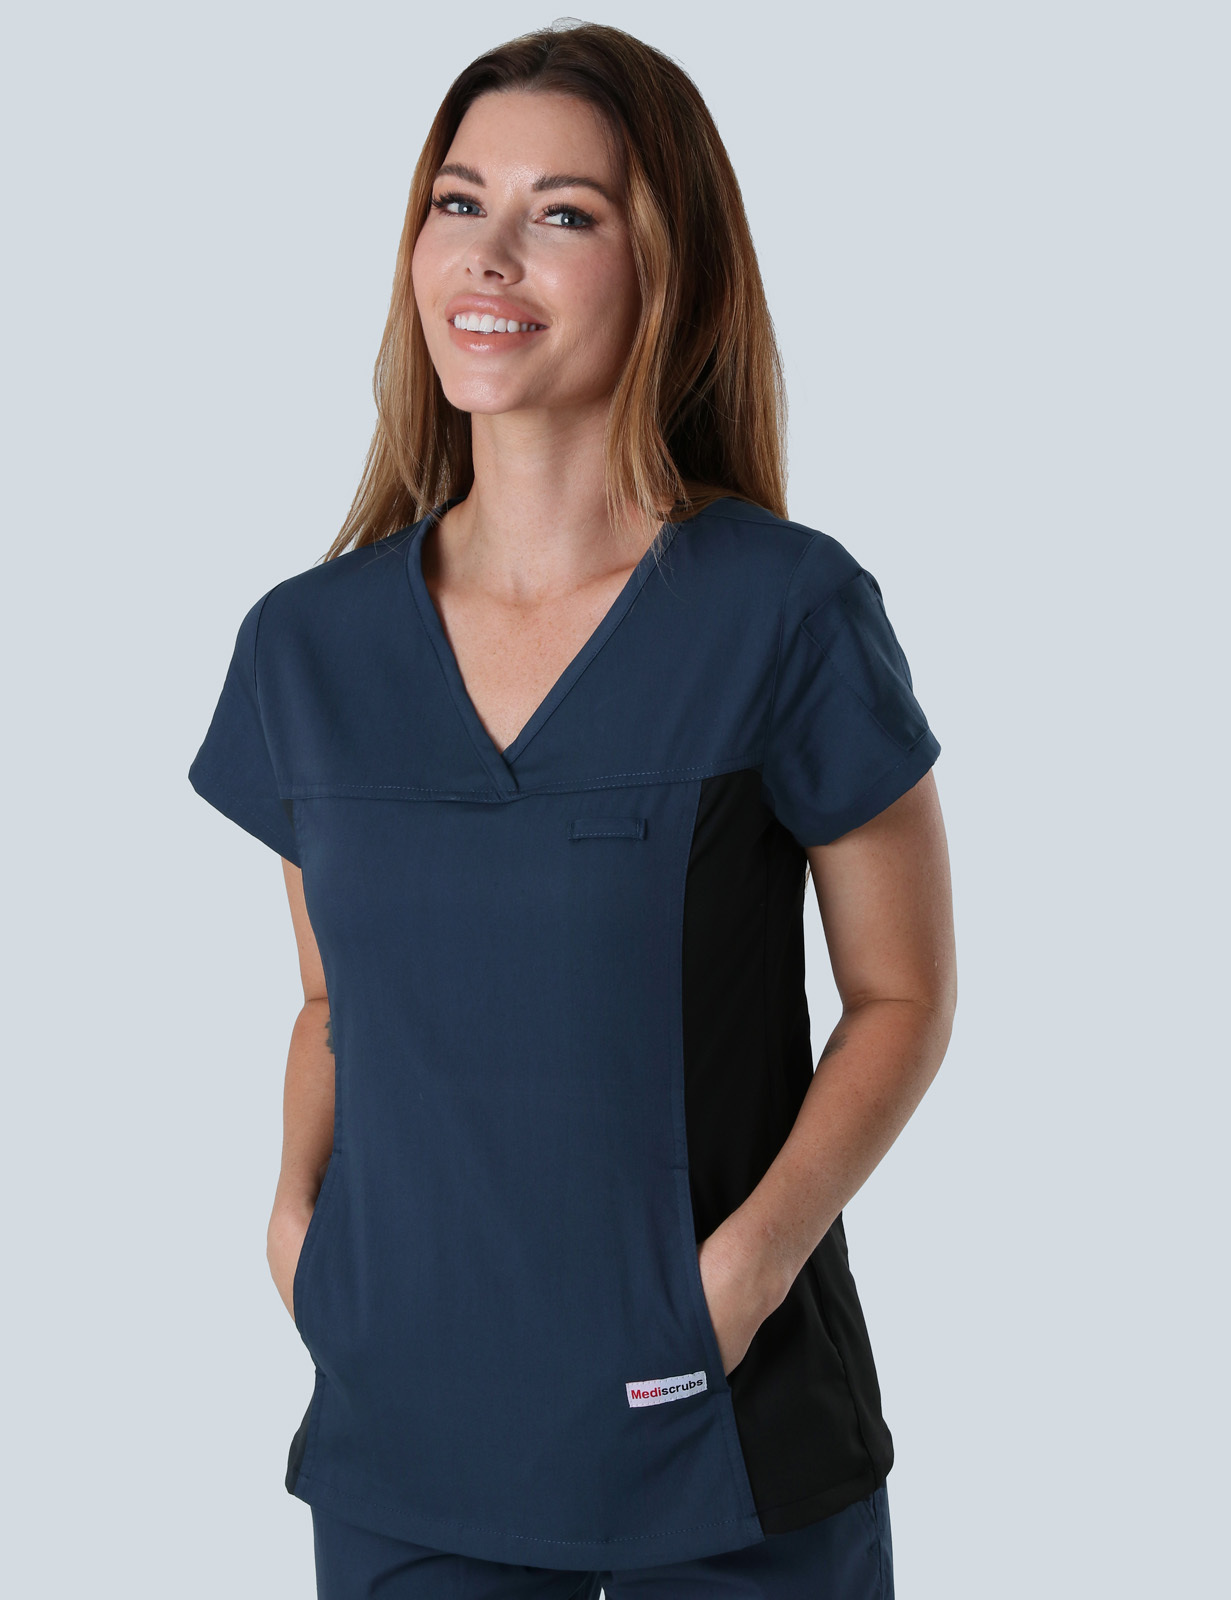 Hobart Hospital - ED RN (Women's Fit Solid Spandex Scrub Top and Cargo Pants in Navy incl Logos)